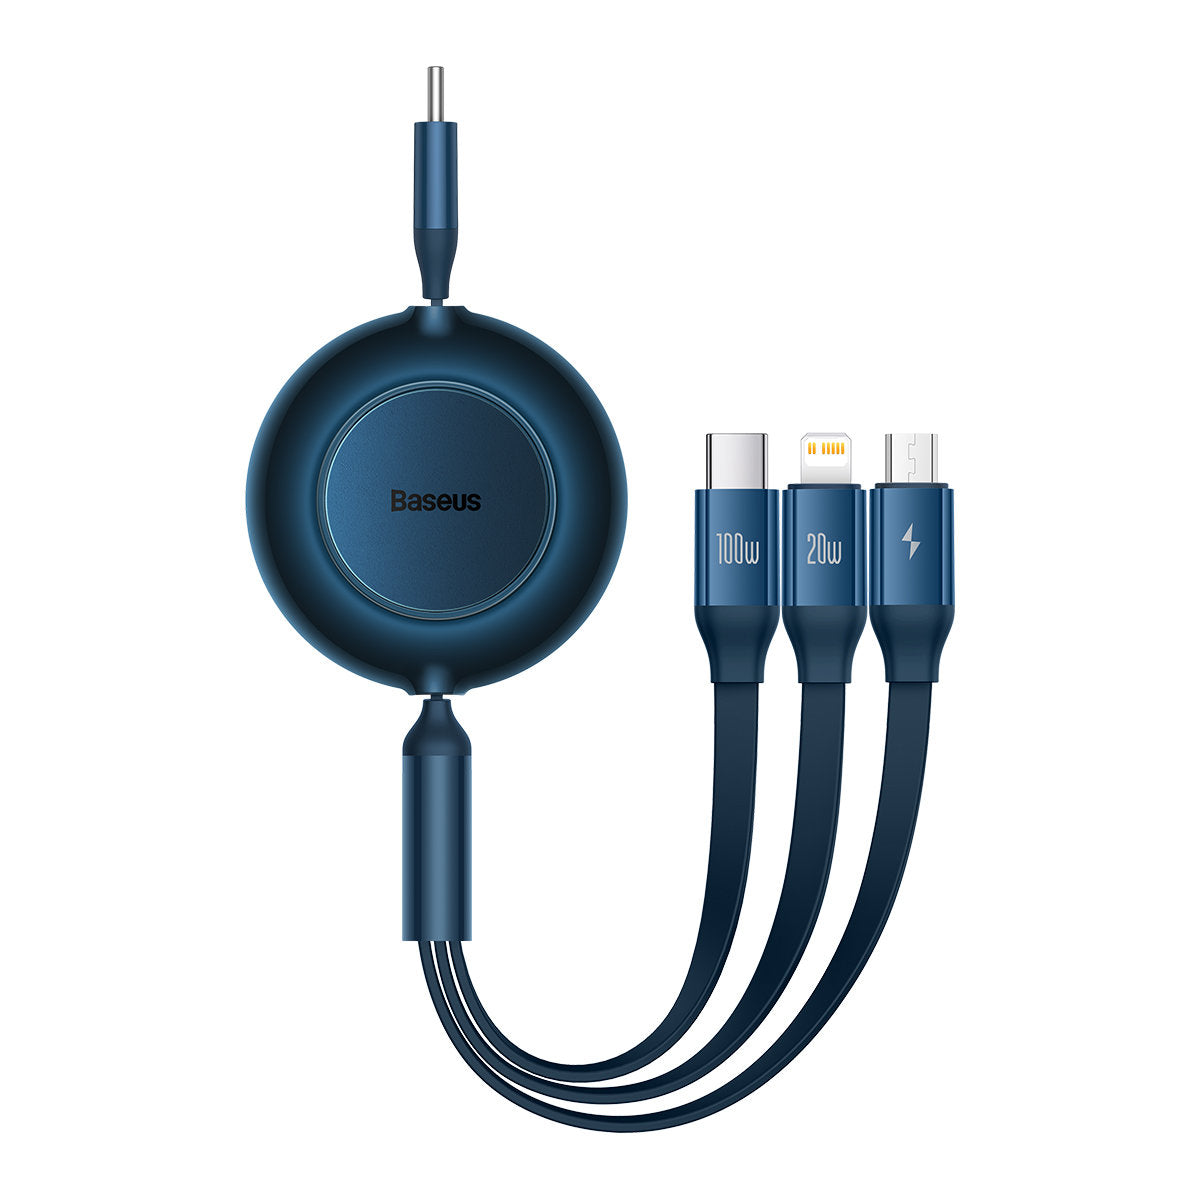 Baseus Bright Mirror 2 retractable cable 3in1 cable USB Type C - micro USB + Lightning + USB Type C 3.5A 1.1m blue (CAMJ010203)